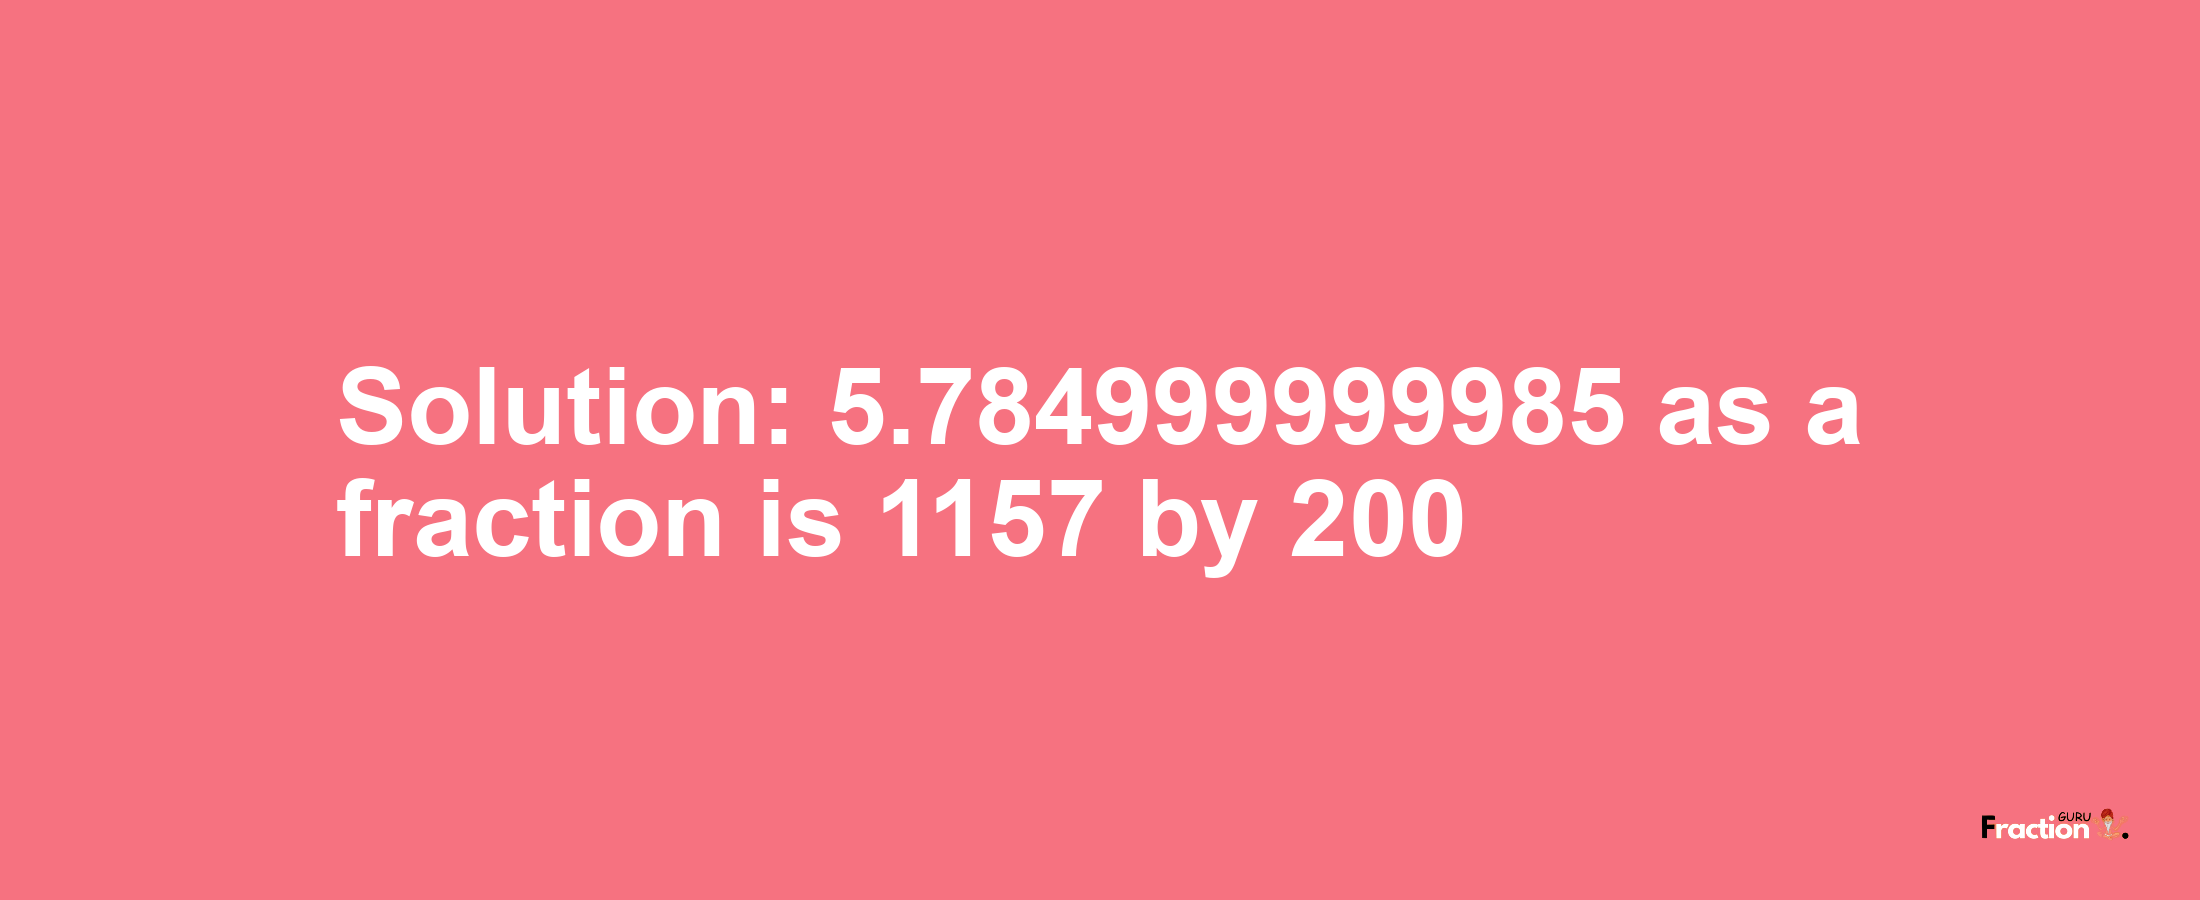 Solution:5.784999999985 as a fraction is 1157/200